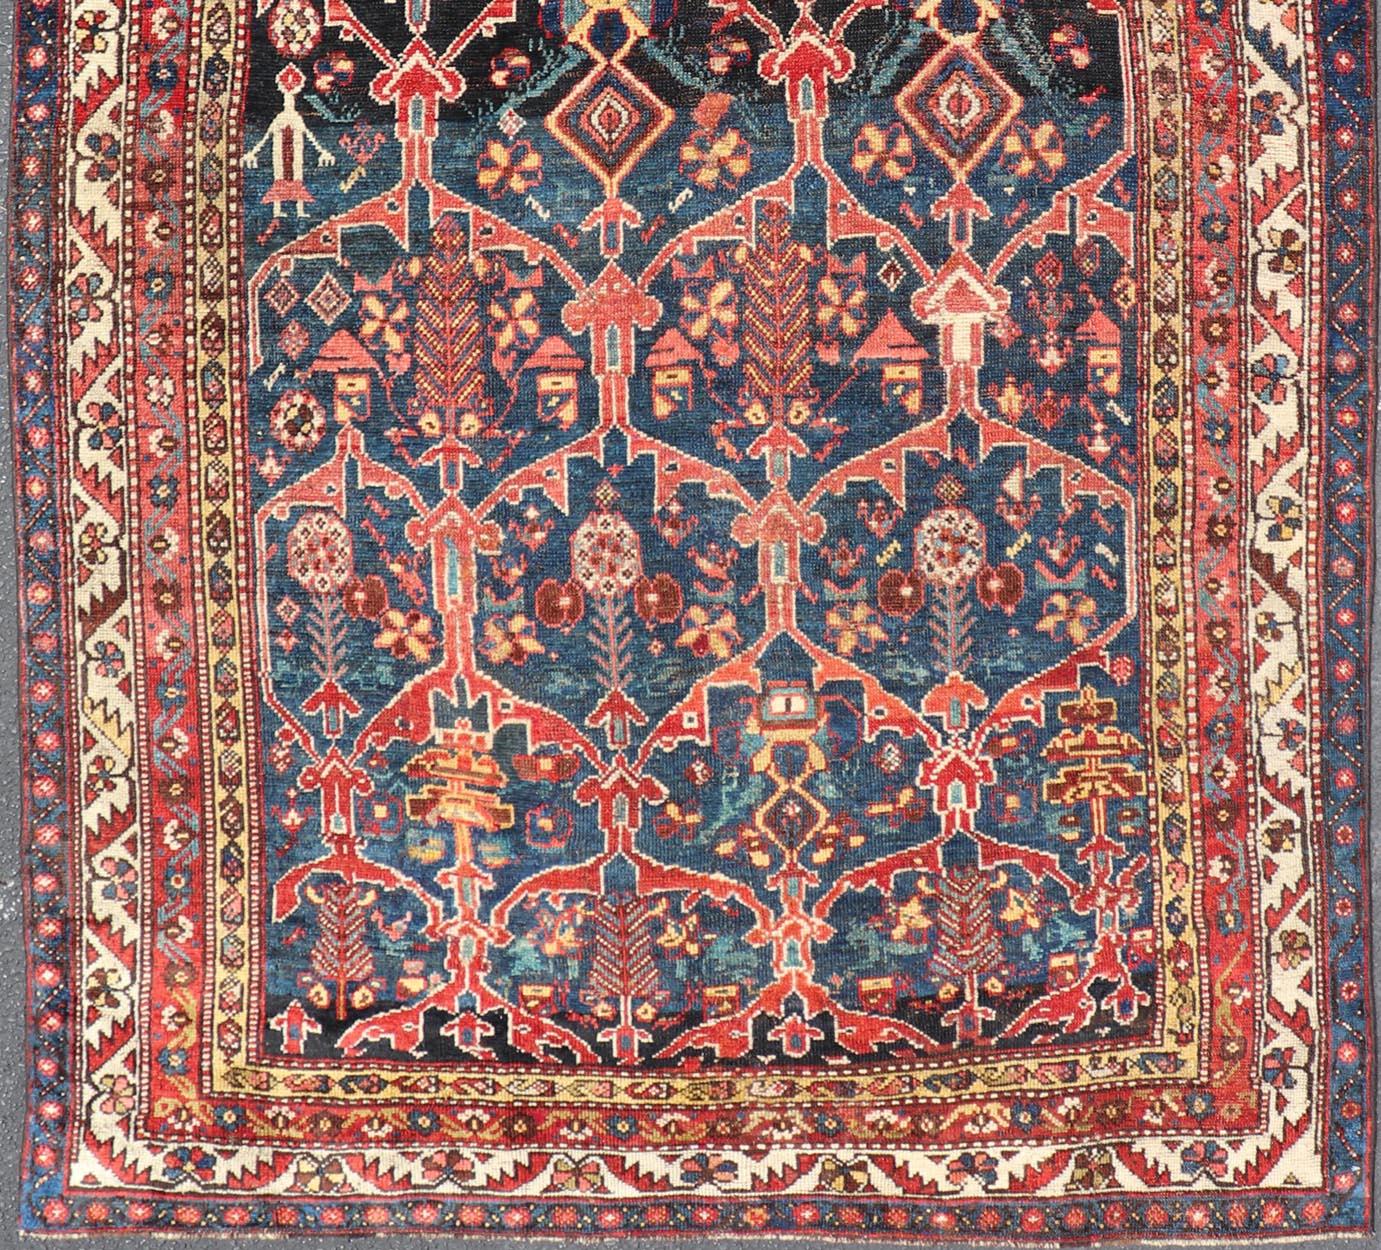 Antique Persian Bakhitari Colorful Rug with All-Over Floral Medallion Design  For Sale 2